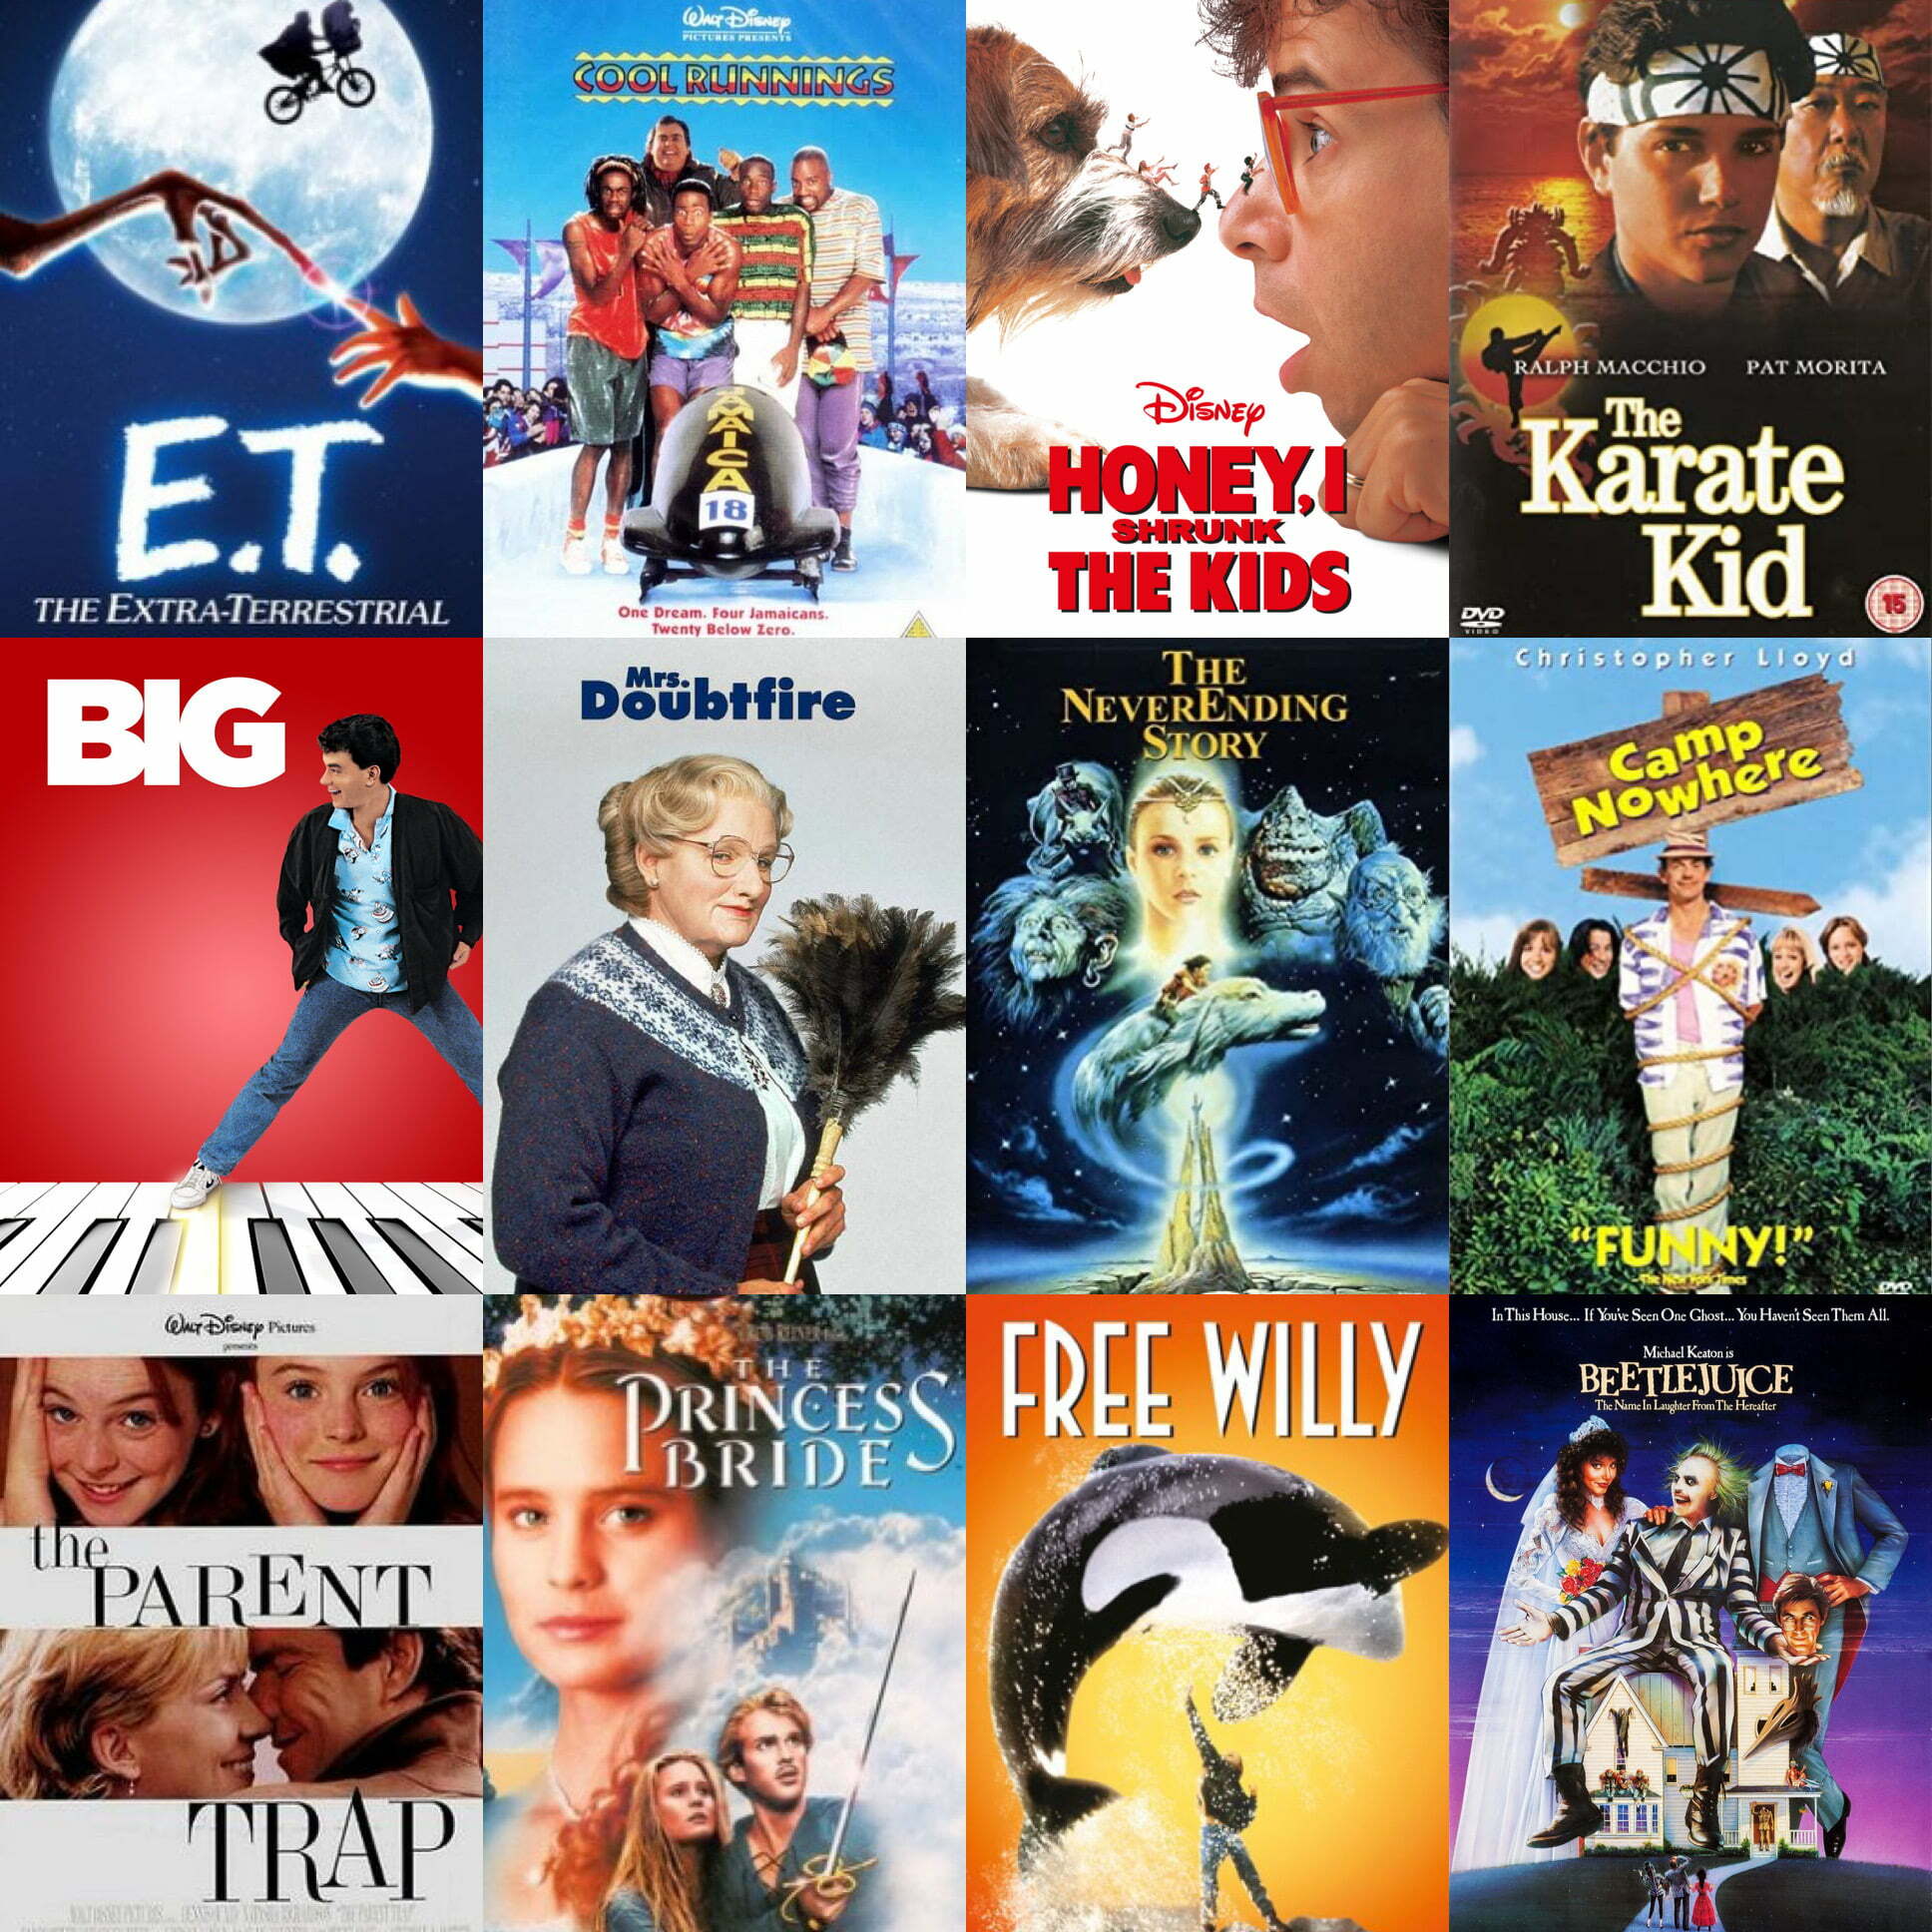 best movies for families on netflix